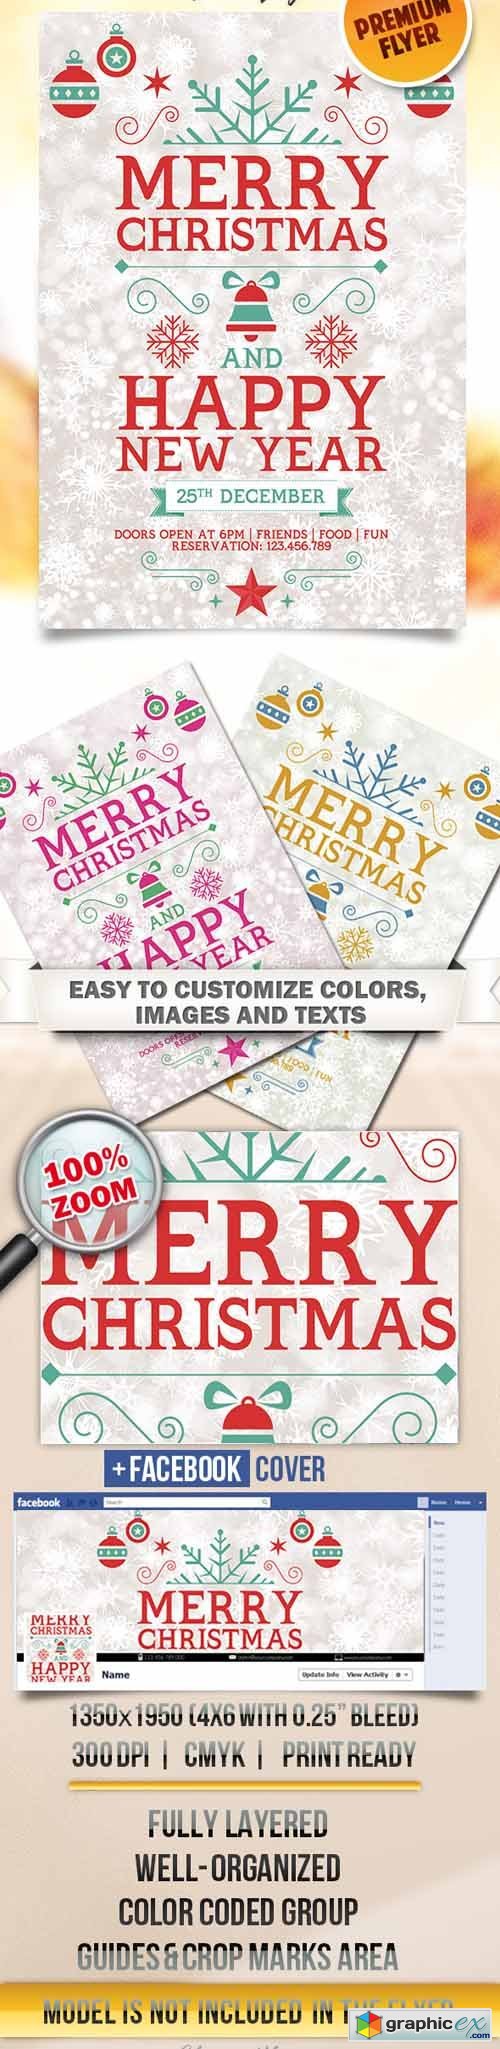 Merry Merry Christmas  Flyer PSD Template + Facebook Cover